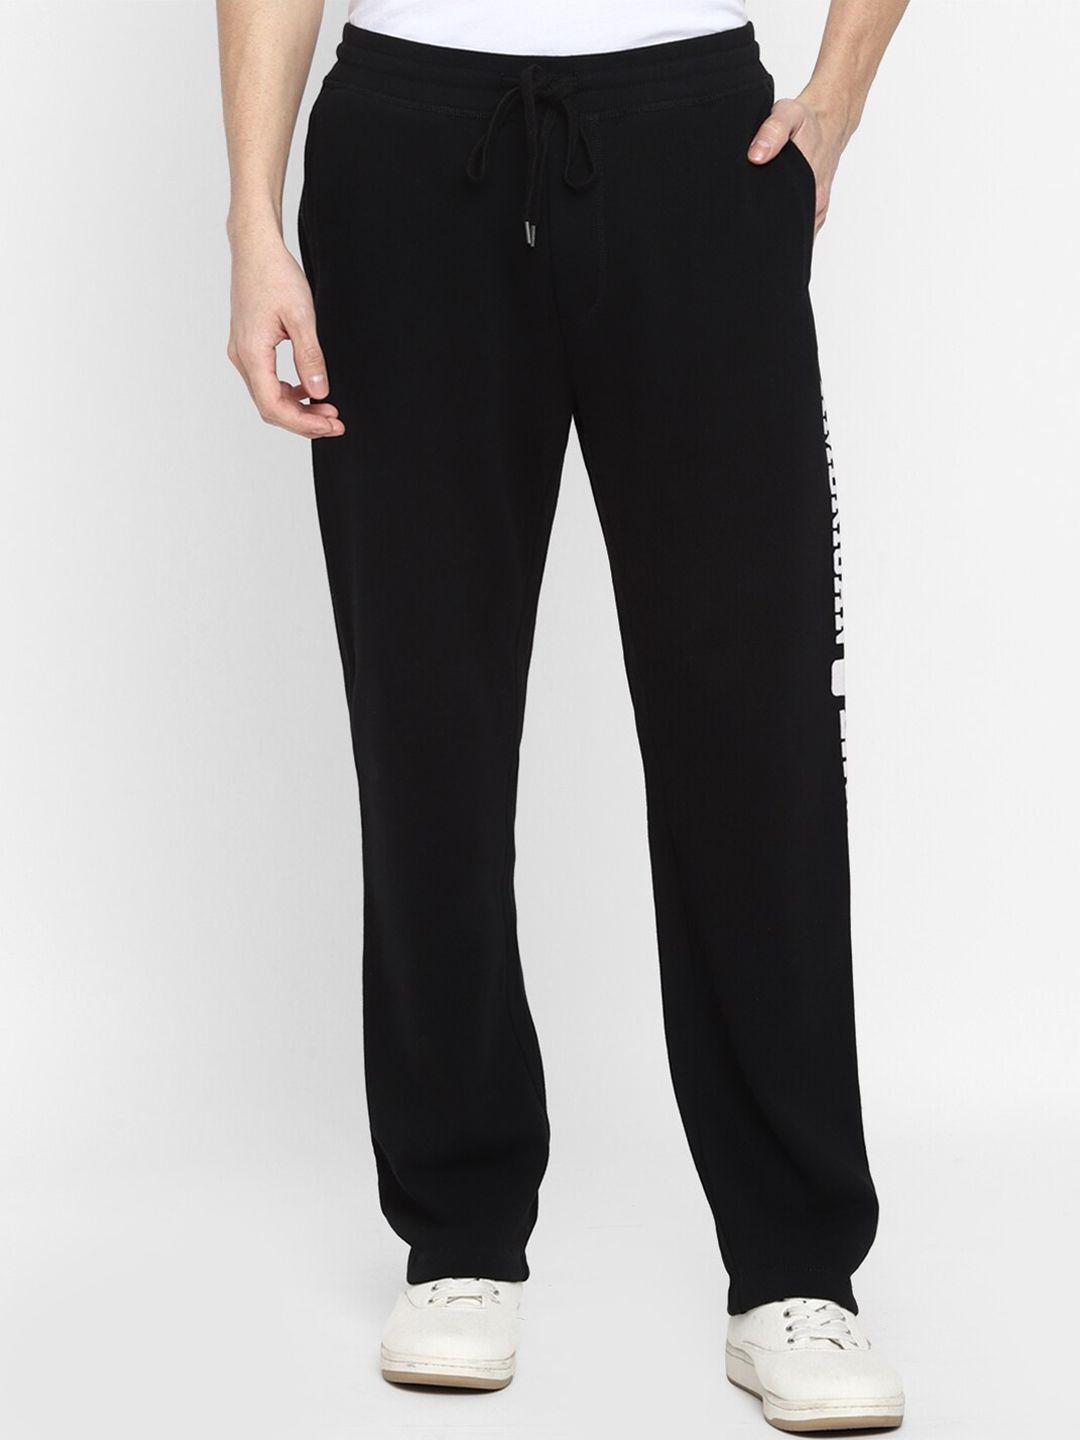 american-eagle-outfitters-men-solid-black-cotton-track-pants